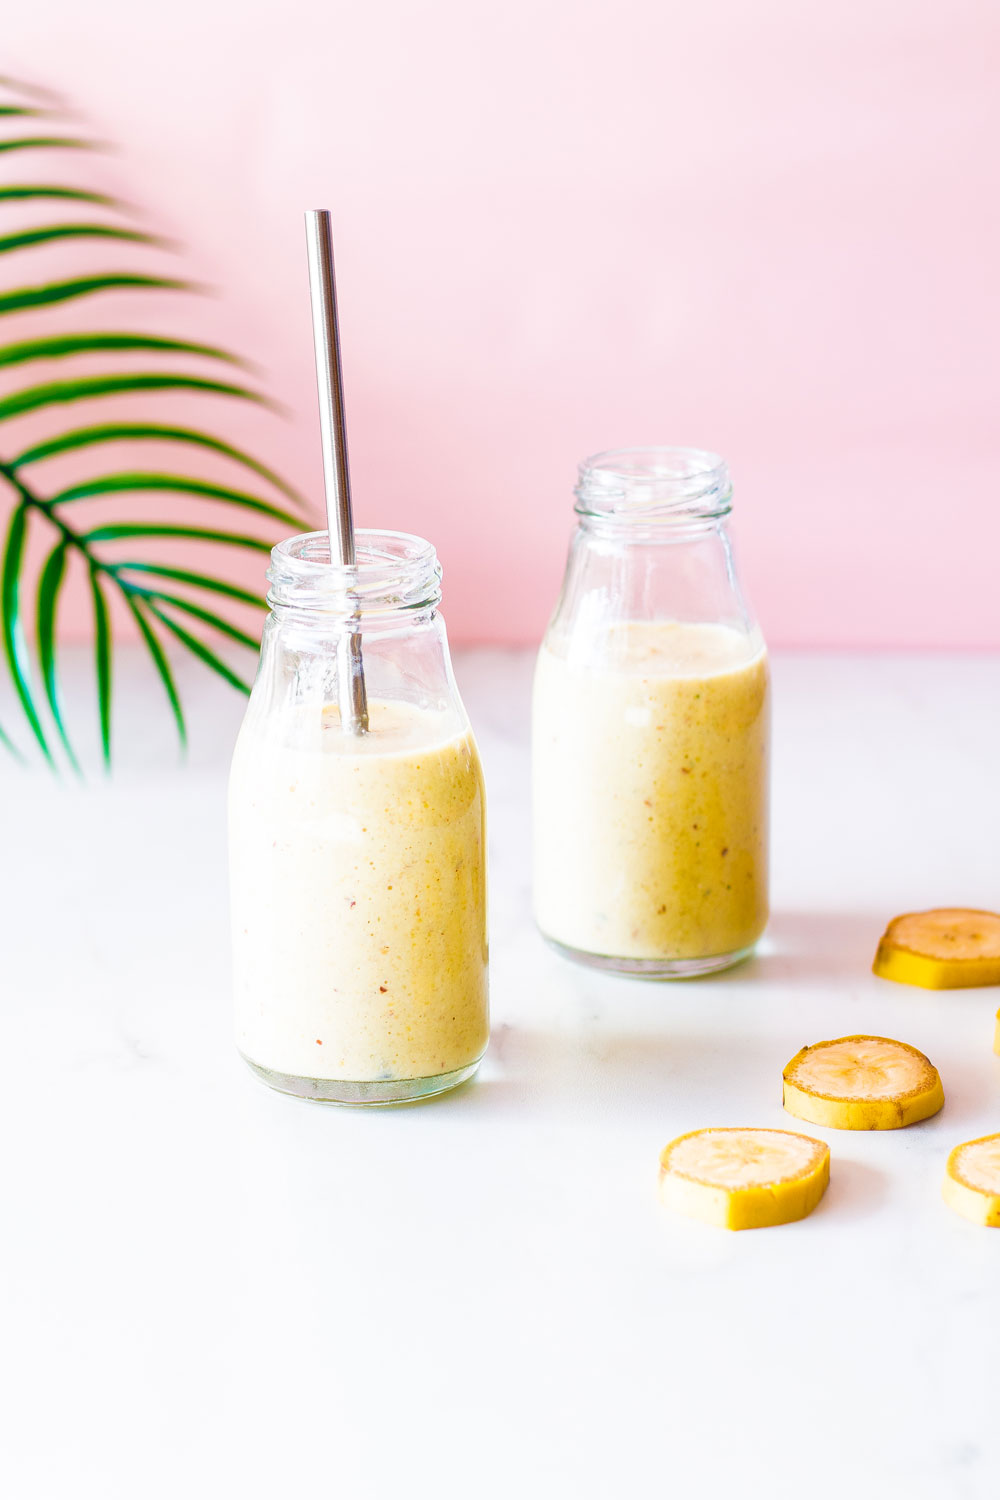 This delicious and athlete approved Banana-Oat Morning Smoothie includes all the fuel you need pre- or post-workout! https://www.spotebi.com/recipes/banana-oat-morning-smoothie/